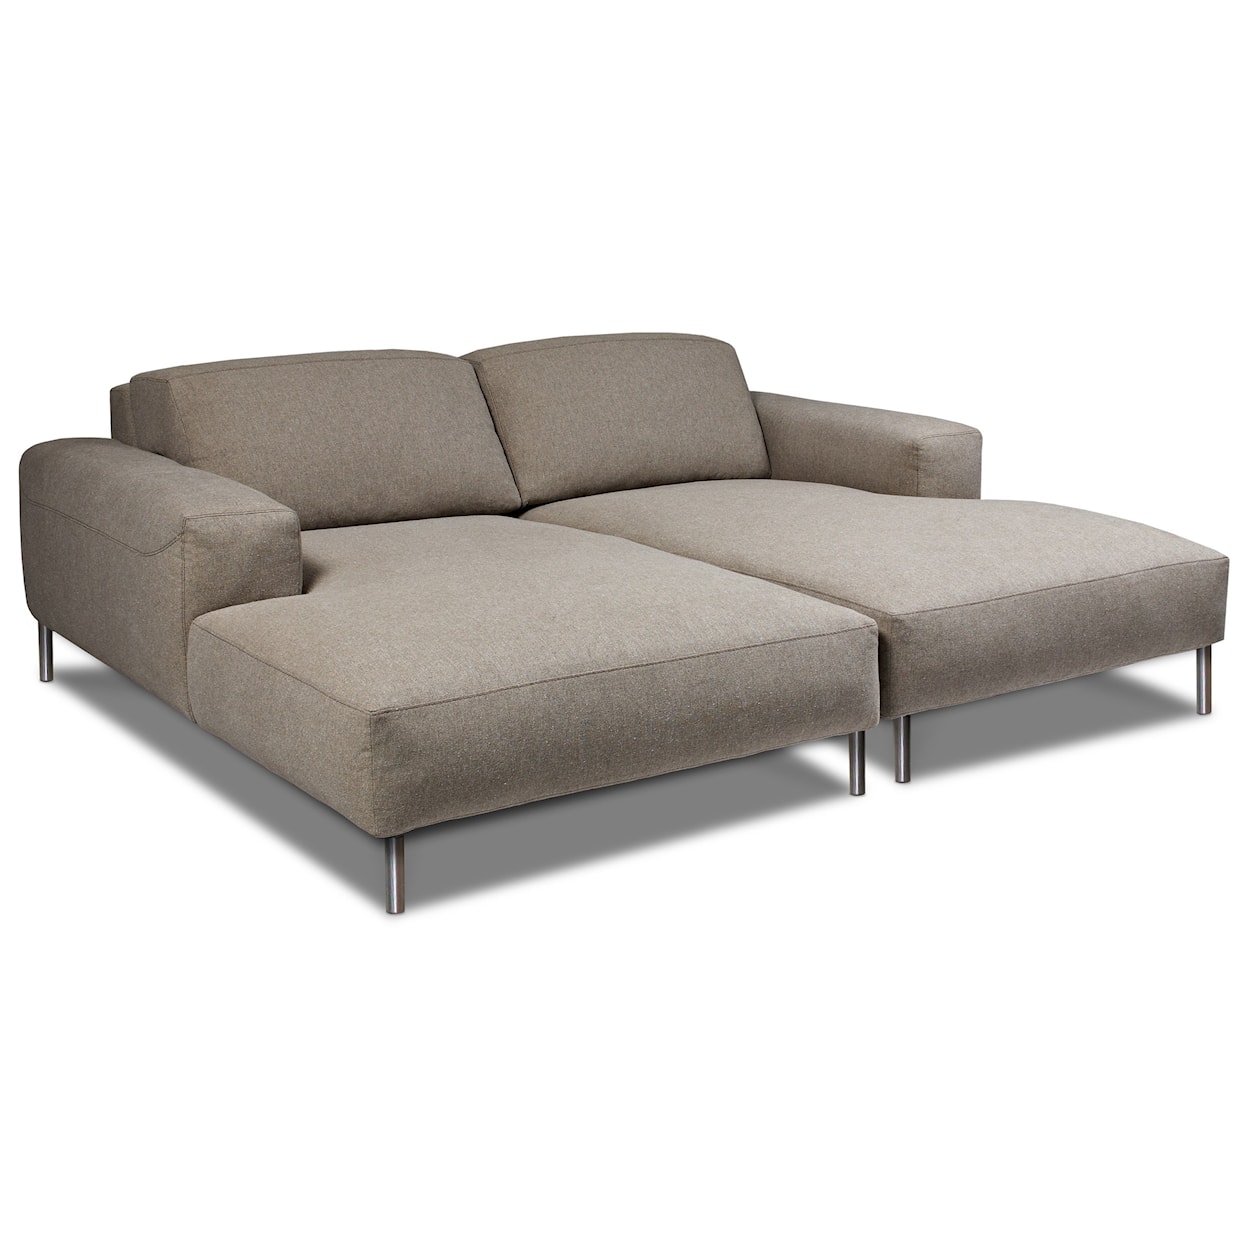 American Leather Meyer 2-Seat Pit Style Sectional Sofa